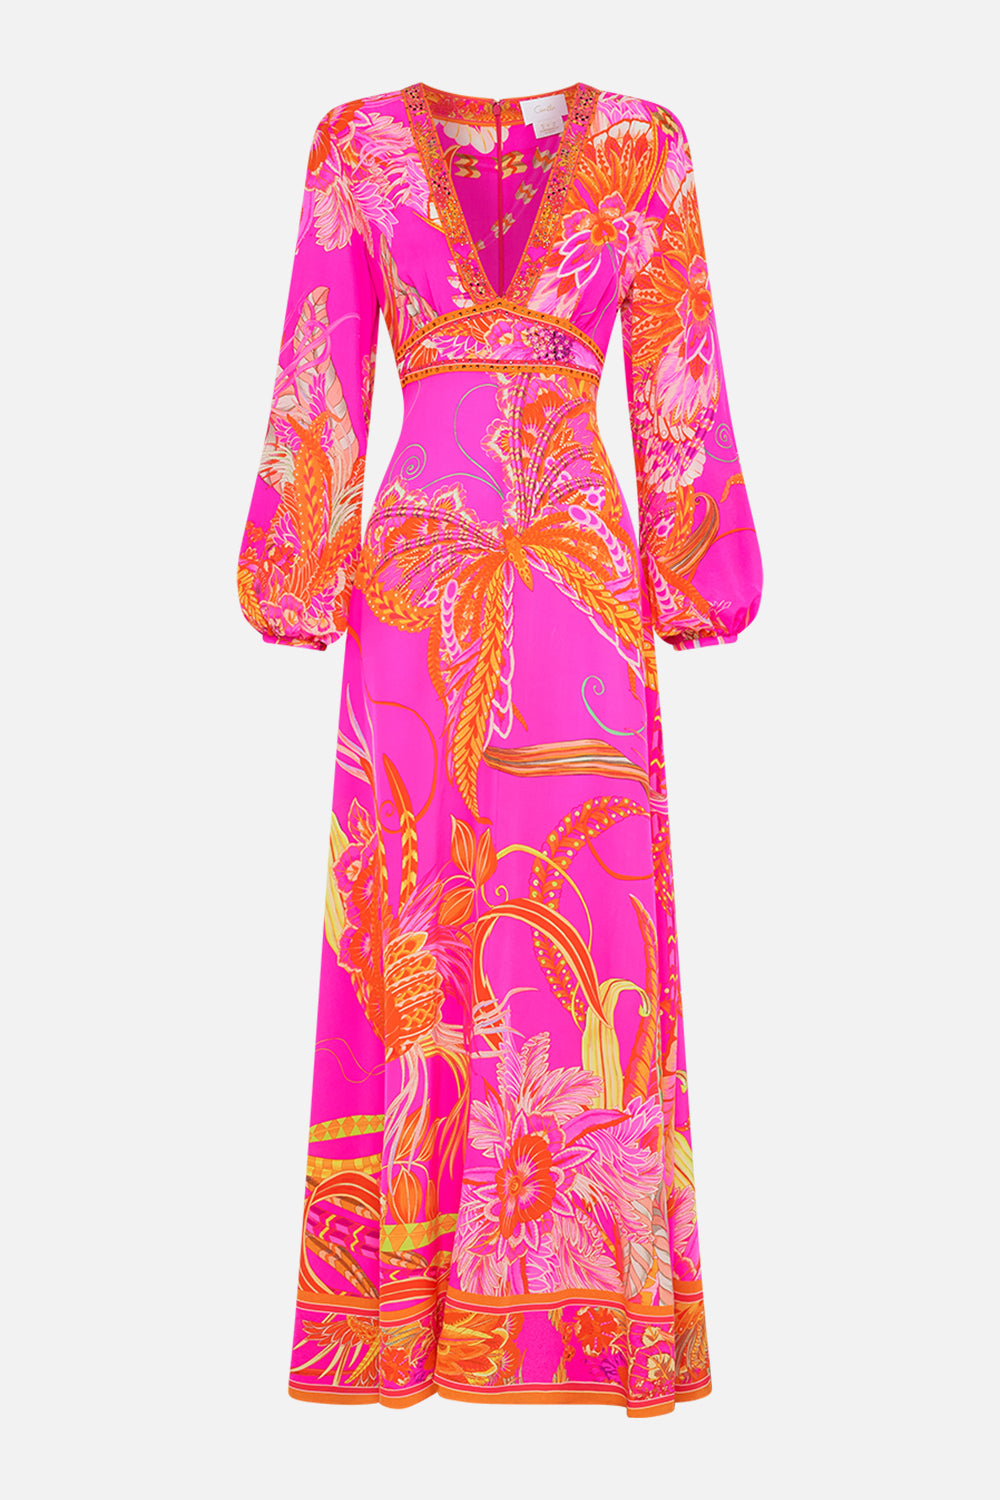 Product view of CAMILLA pink silk dress in A Heart That Flutters print